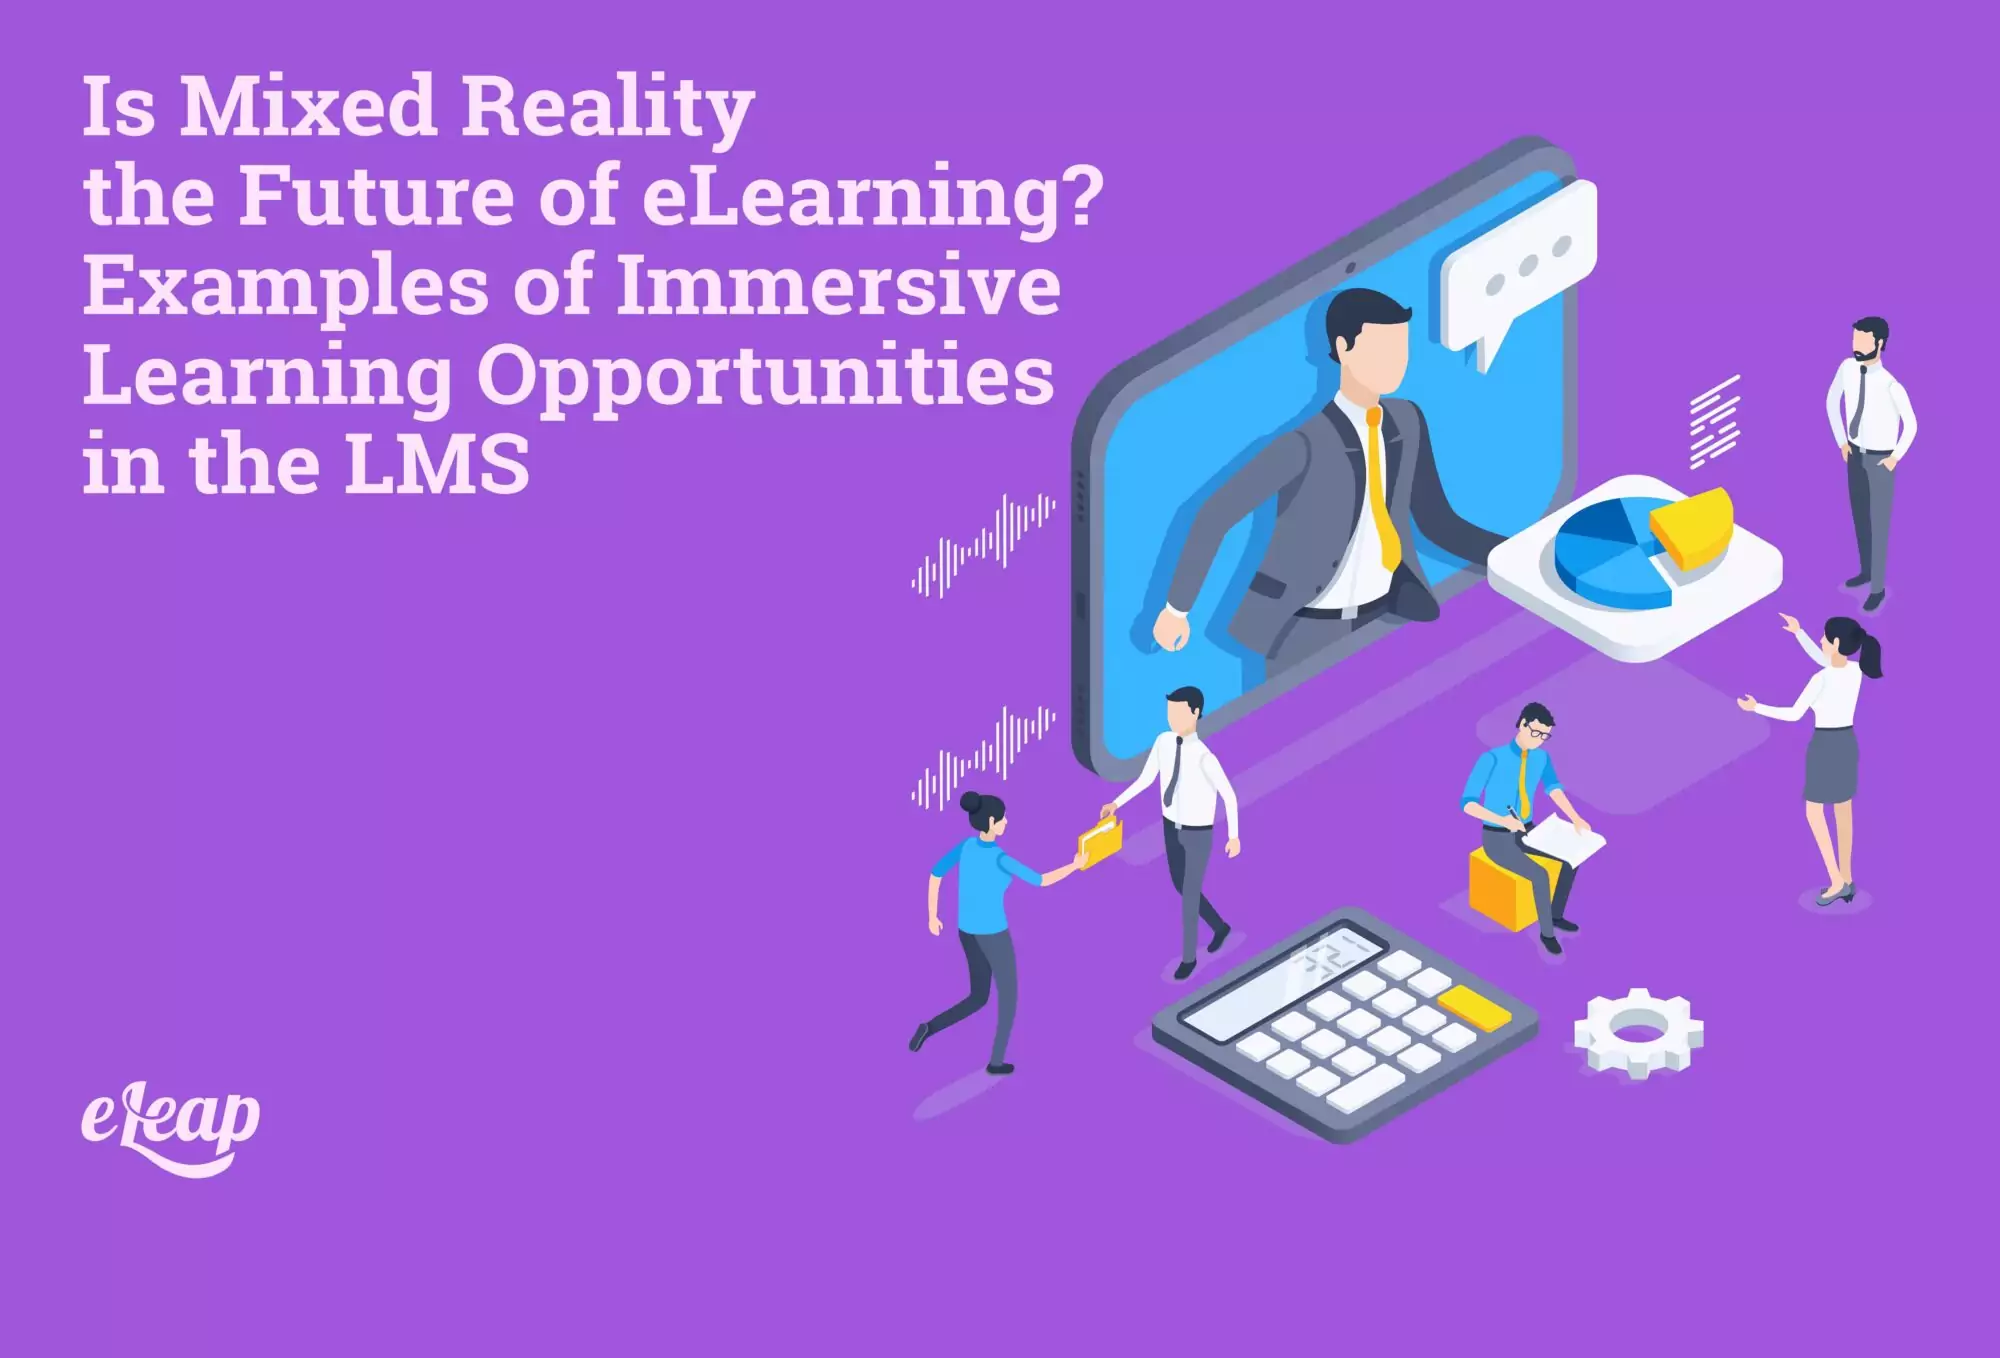 Is Mixed Reality the Future of eLearning? Examples of Immersive Learning Opportunities in the LMS